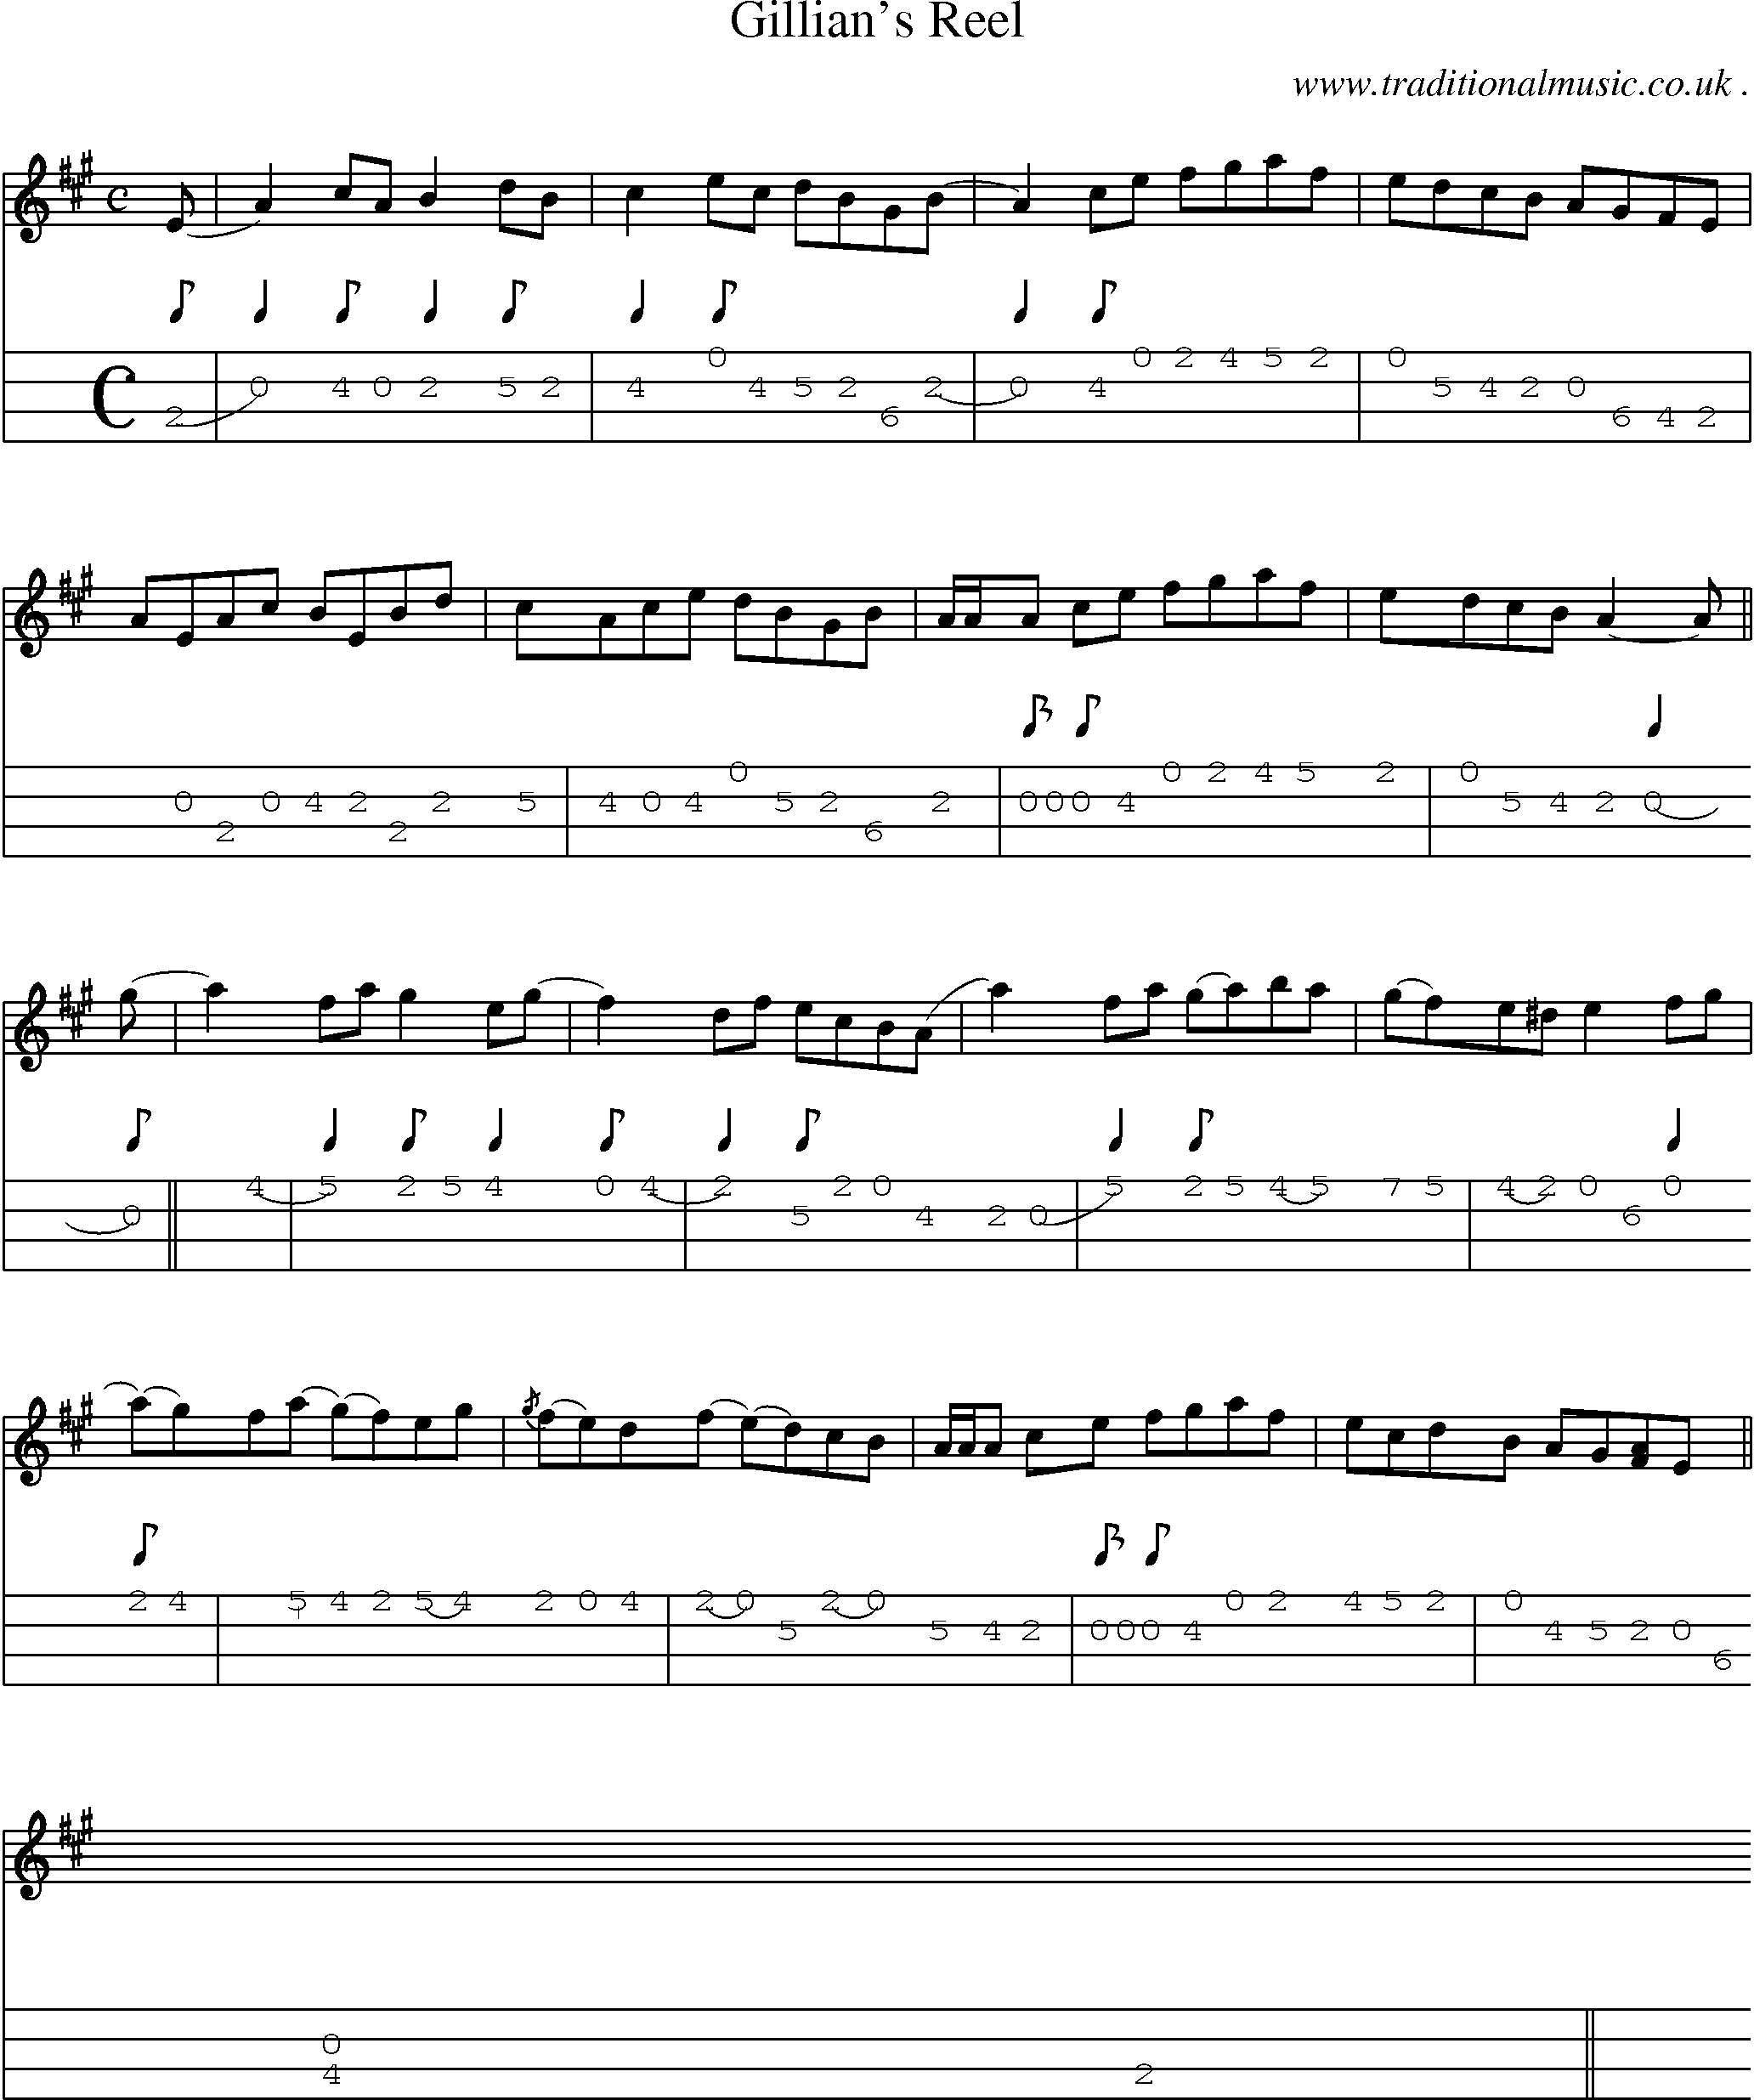 Sheet-music  score, Chords and Mandolin Tabs for Gillians Reel